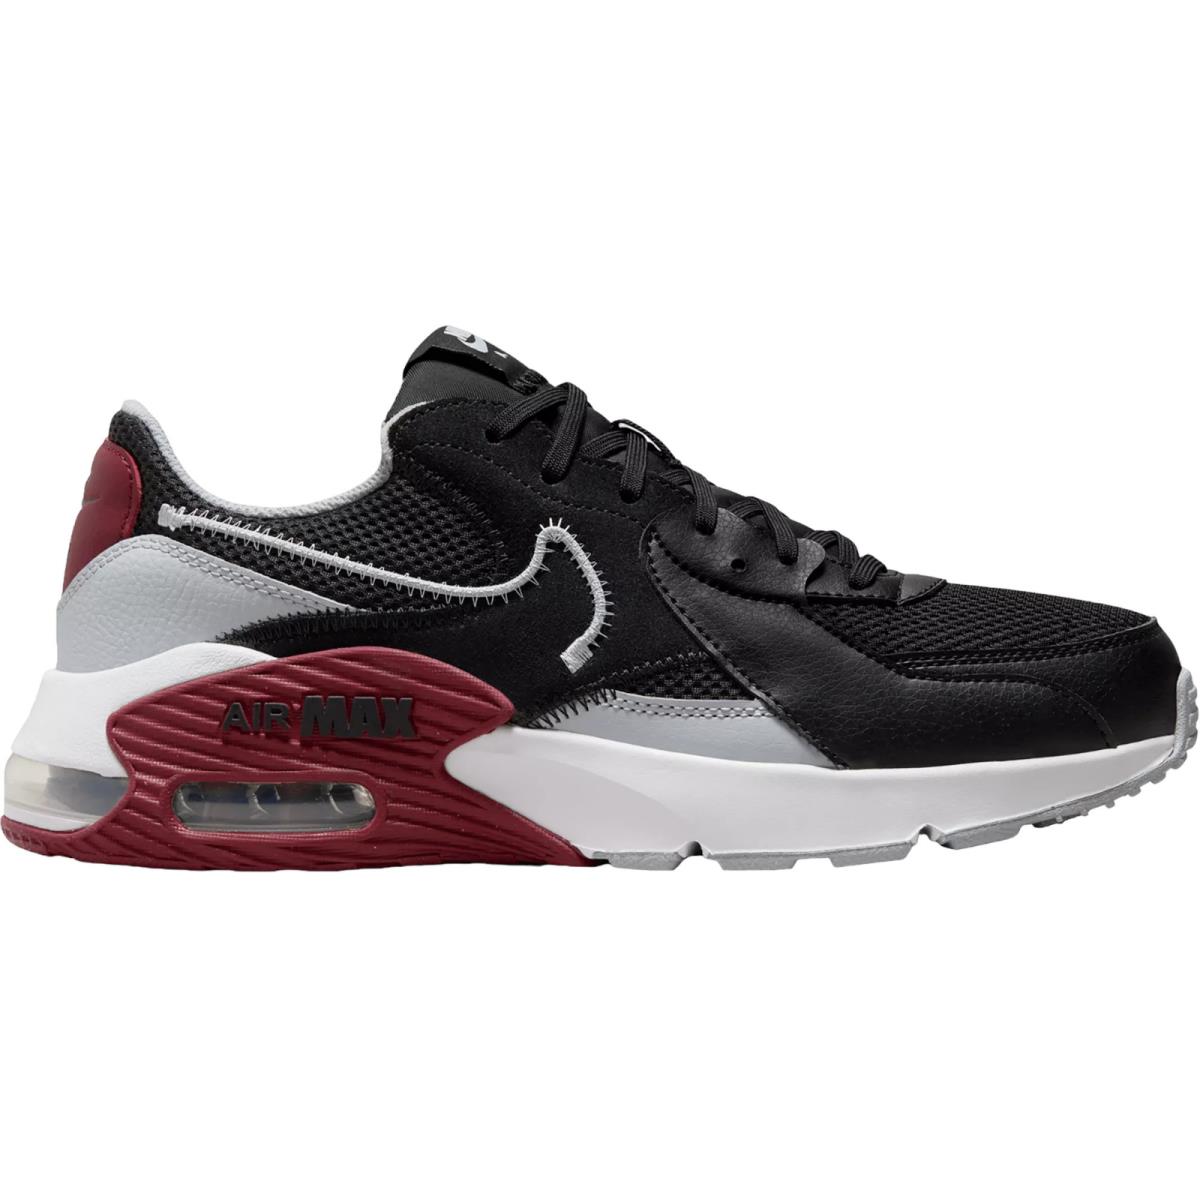 Nike Air Max Excee Men`s Casual Shoes All Colors US Sizes 7-14 Black/Wolf Grey/Team Red/Black